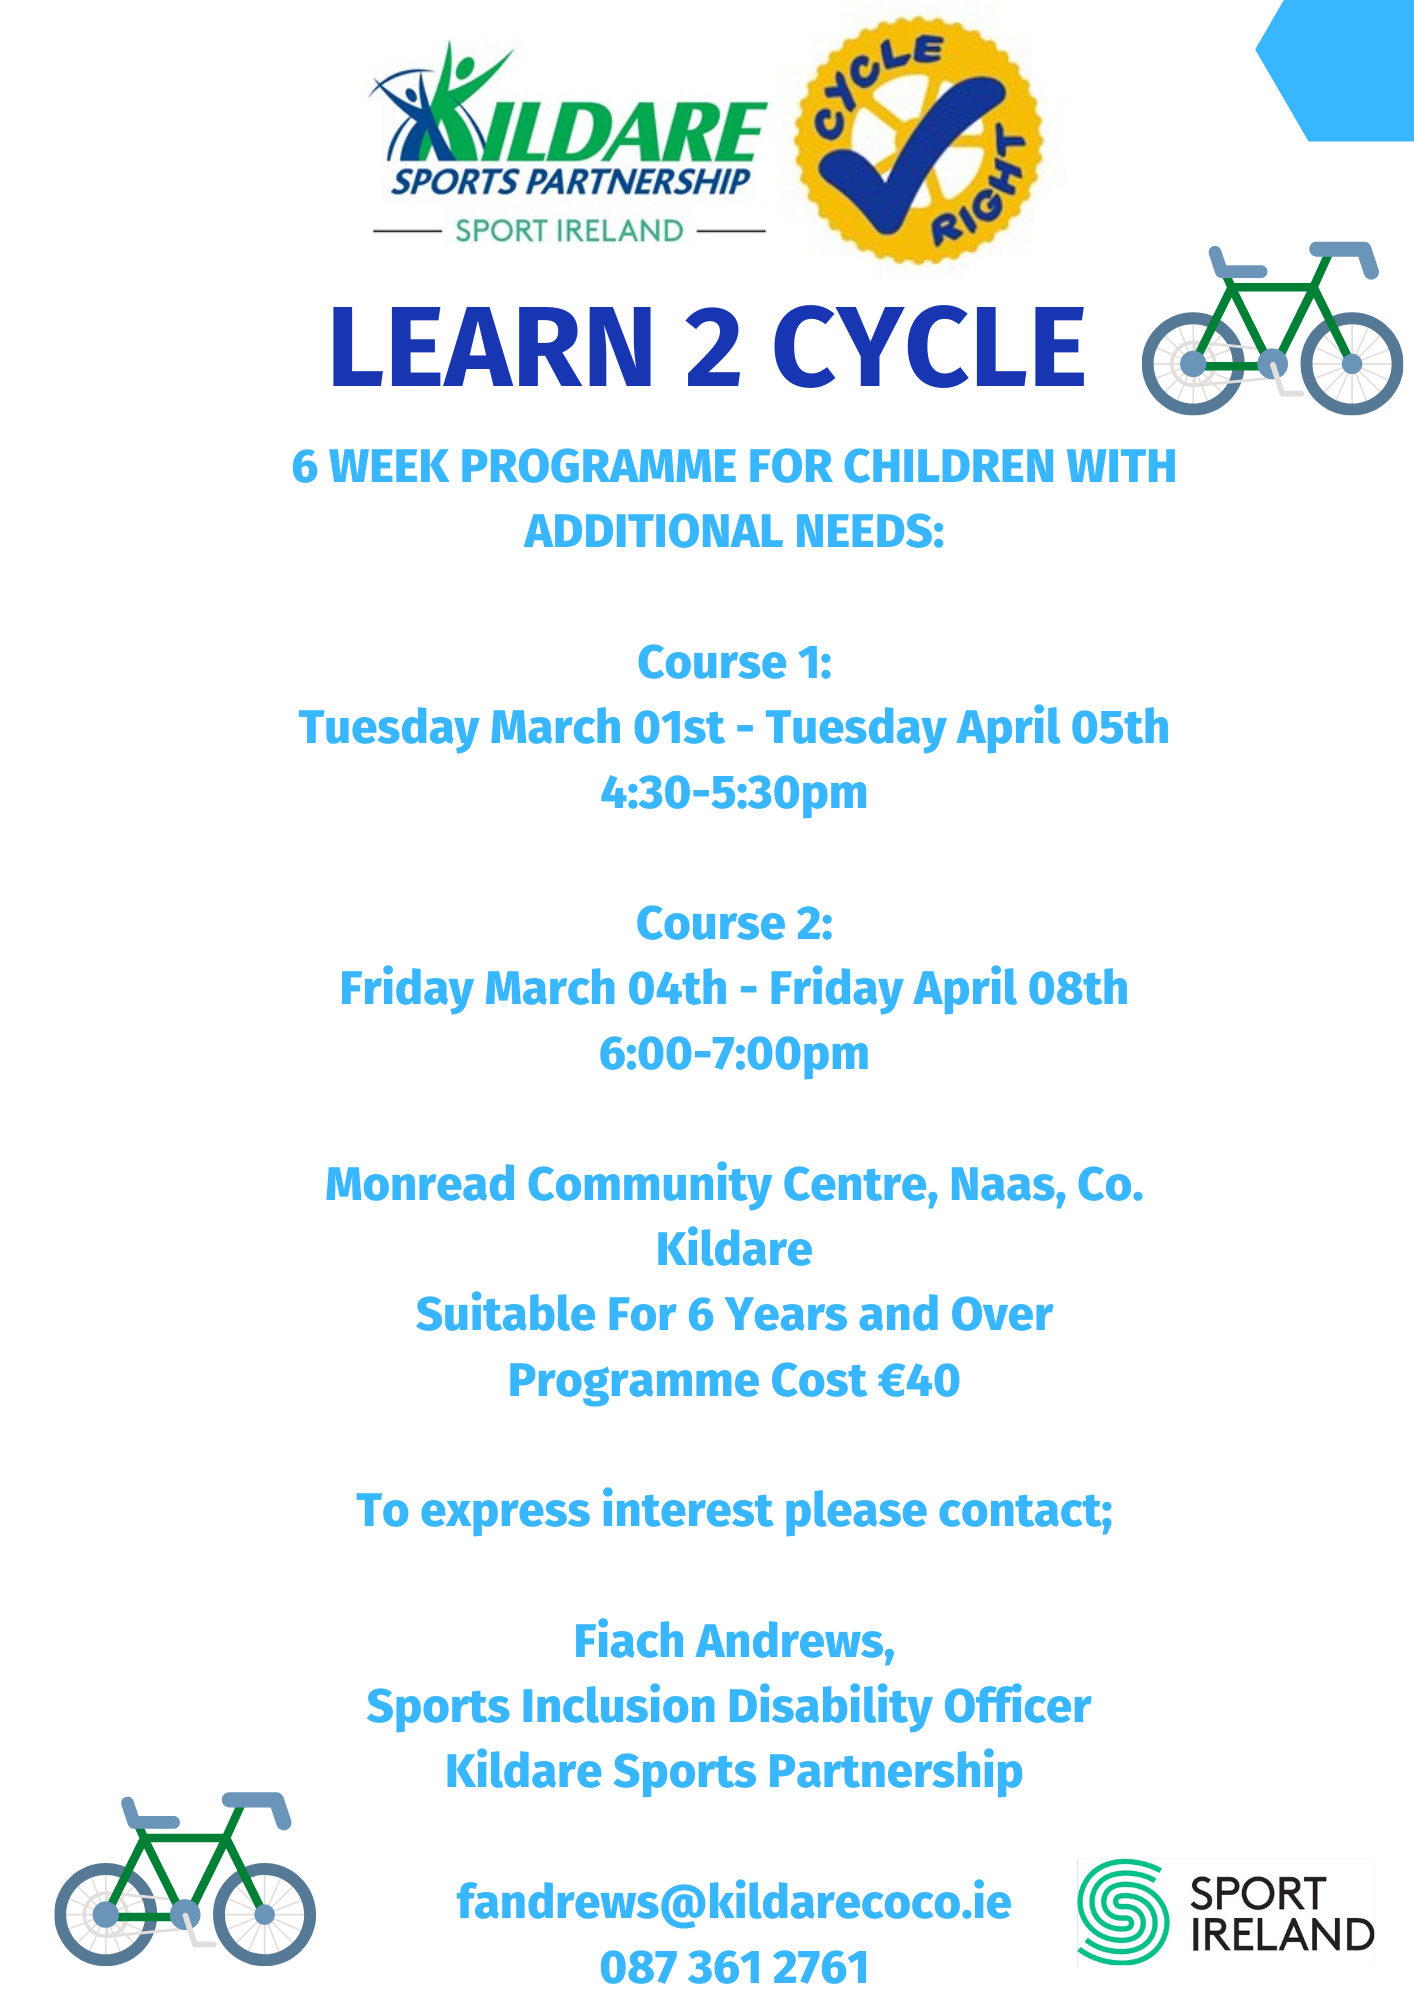 Learn 2 Cycle Programme